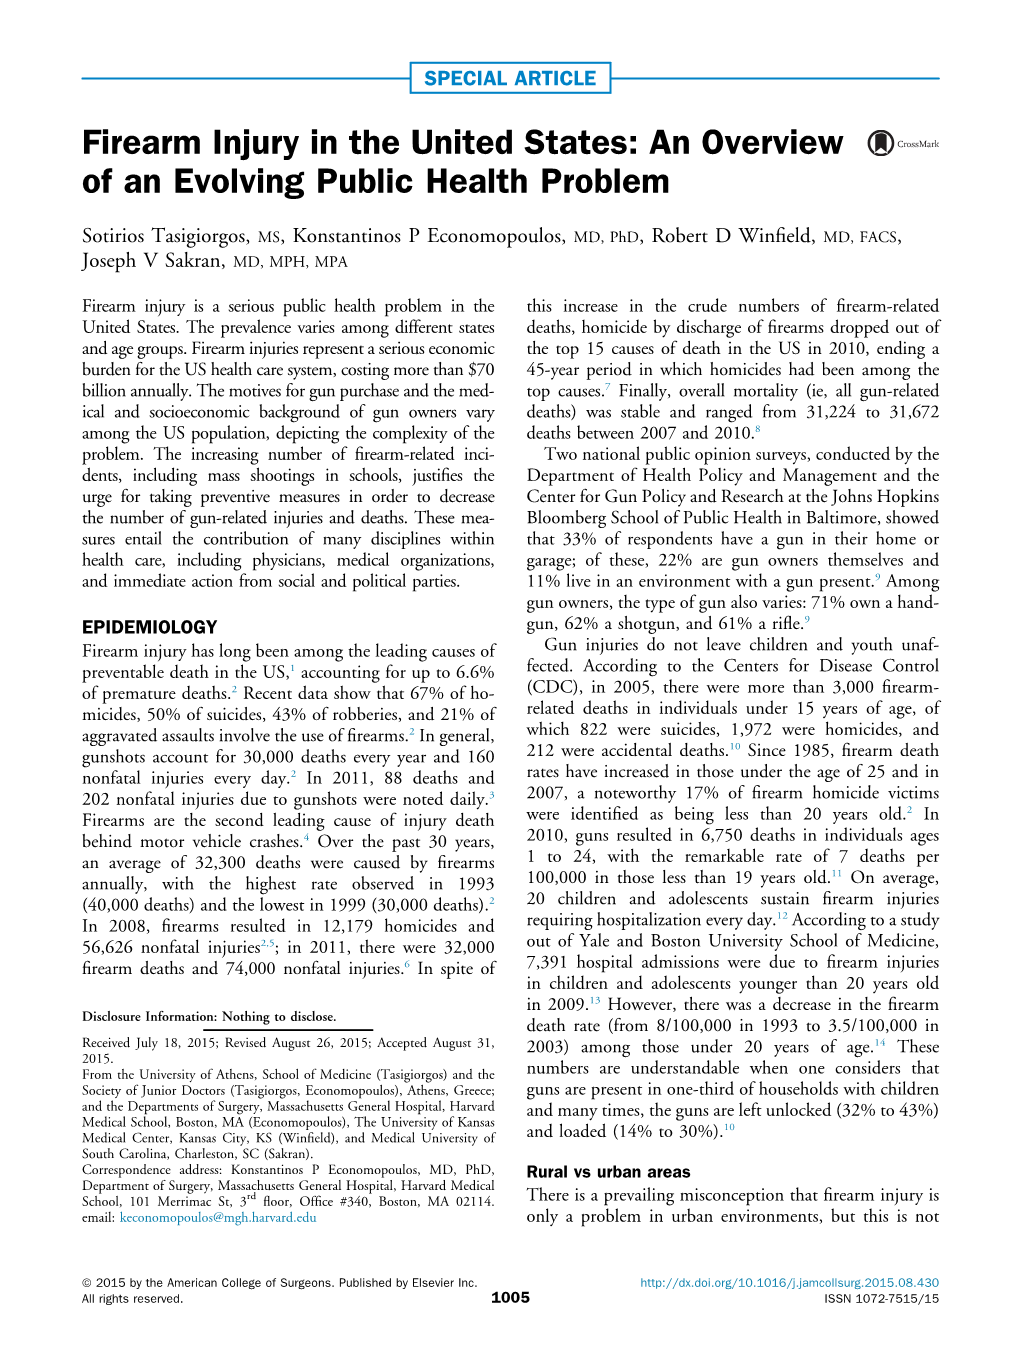 Firearm Injury in the United States: an Overview of an Evolving Public Health Problem